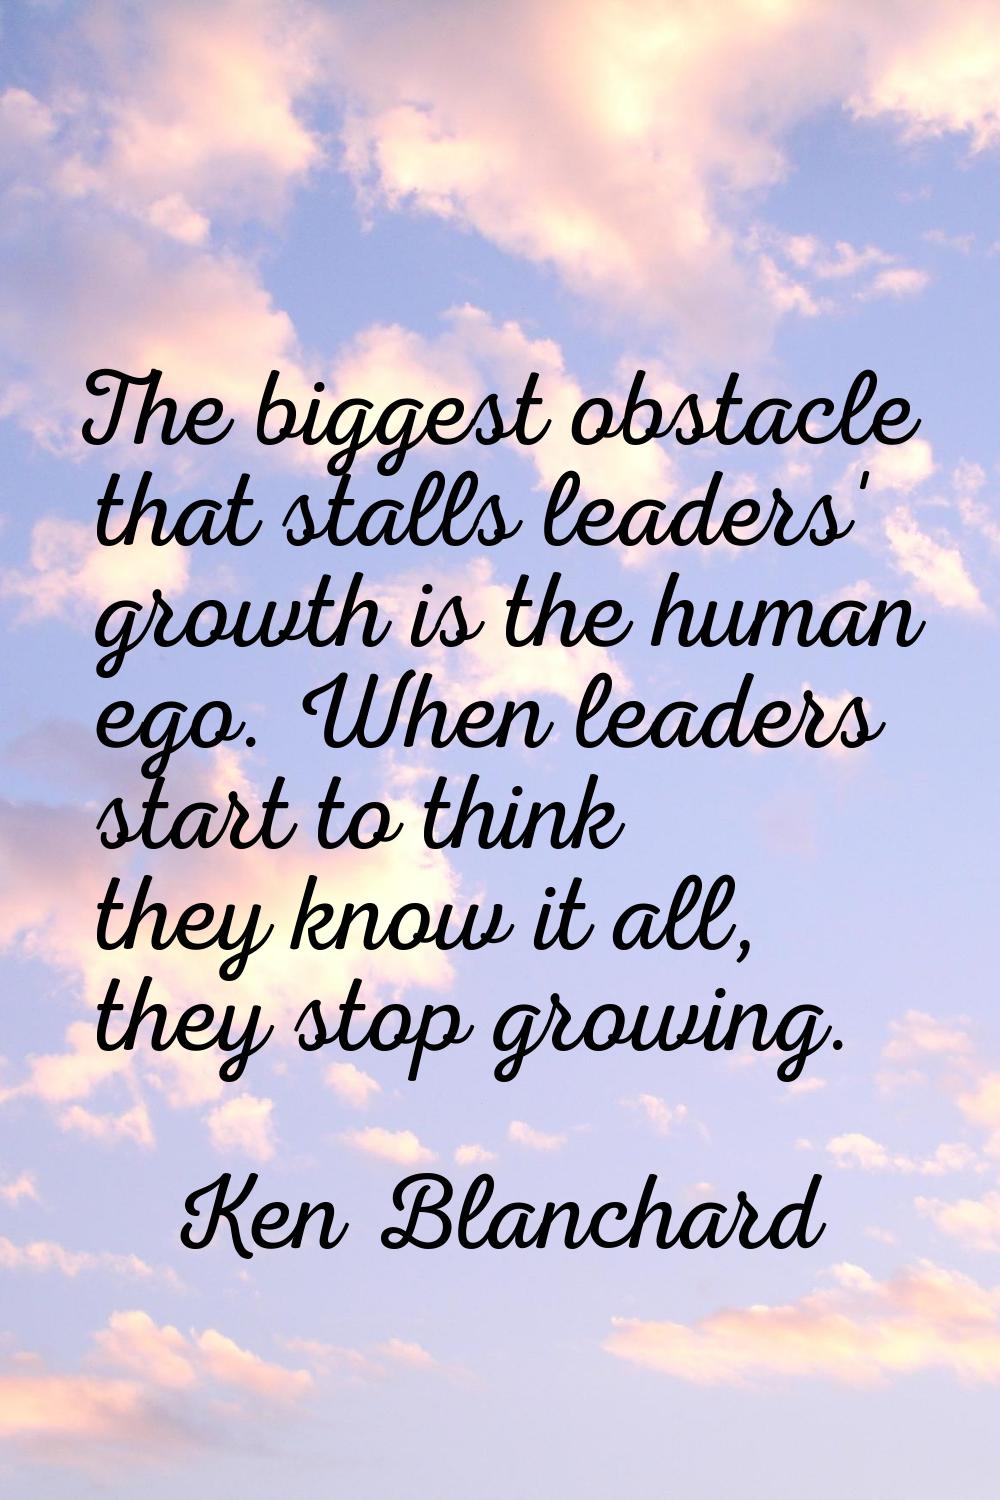 The biggest obstacle that stalls leaders' growth is the human ego. When leaders start to think they